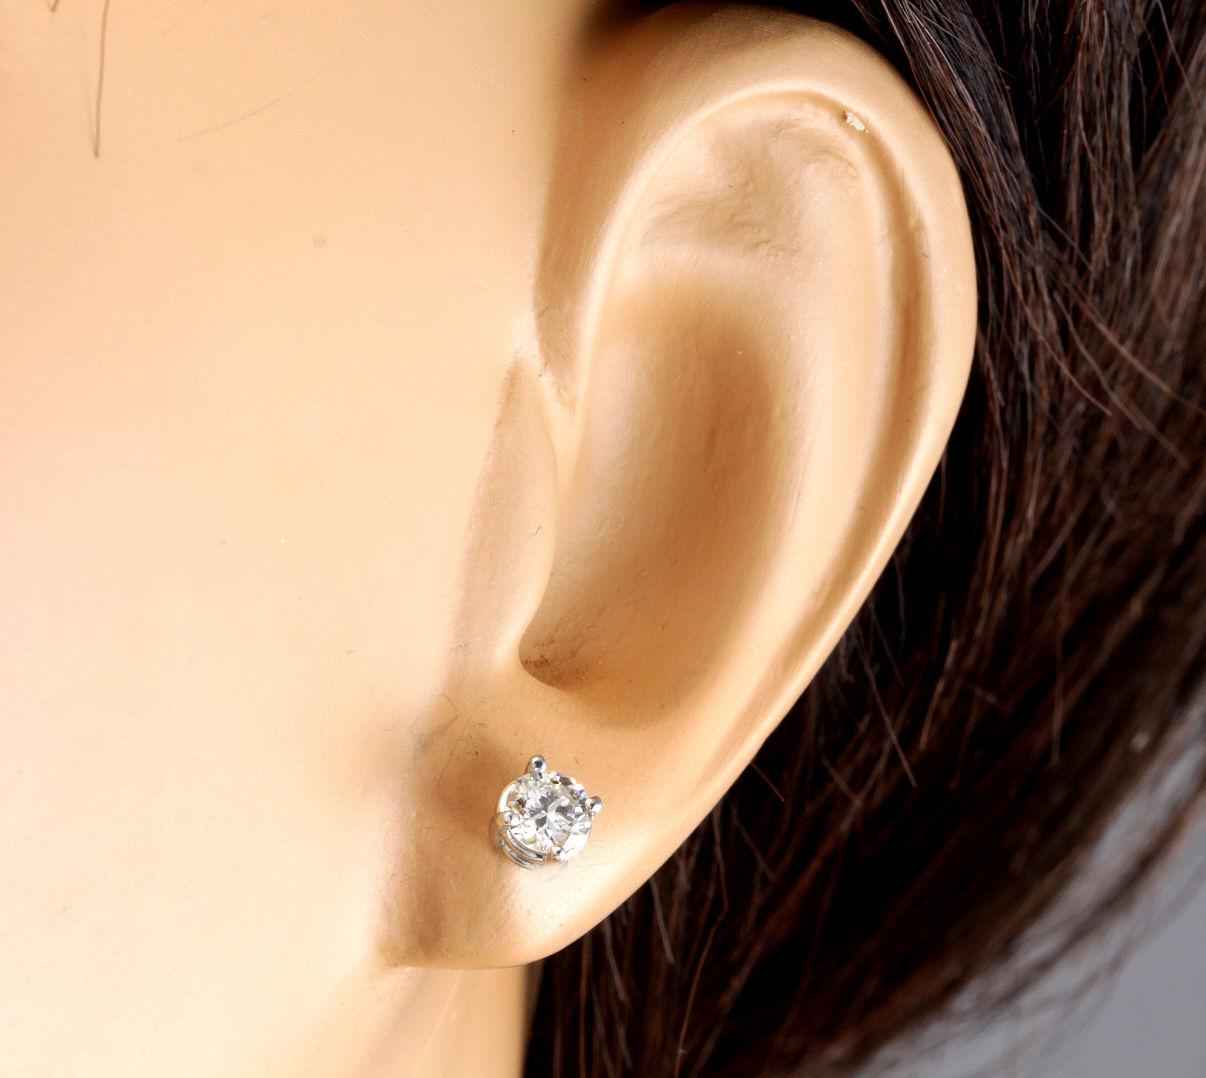 Women's Exquisite .80 Carat Natural Diamond 14 Karat Solid White Gold Stud Earrings For Sale